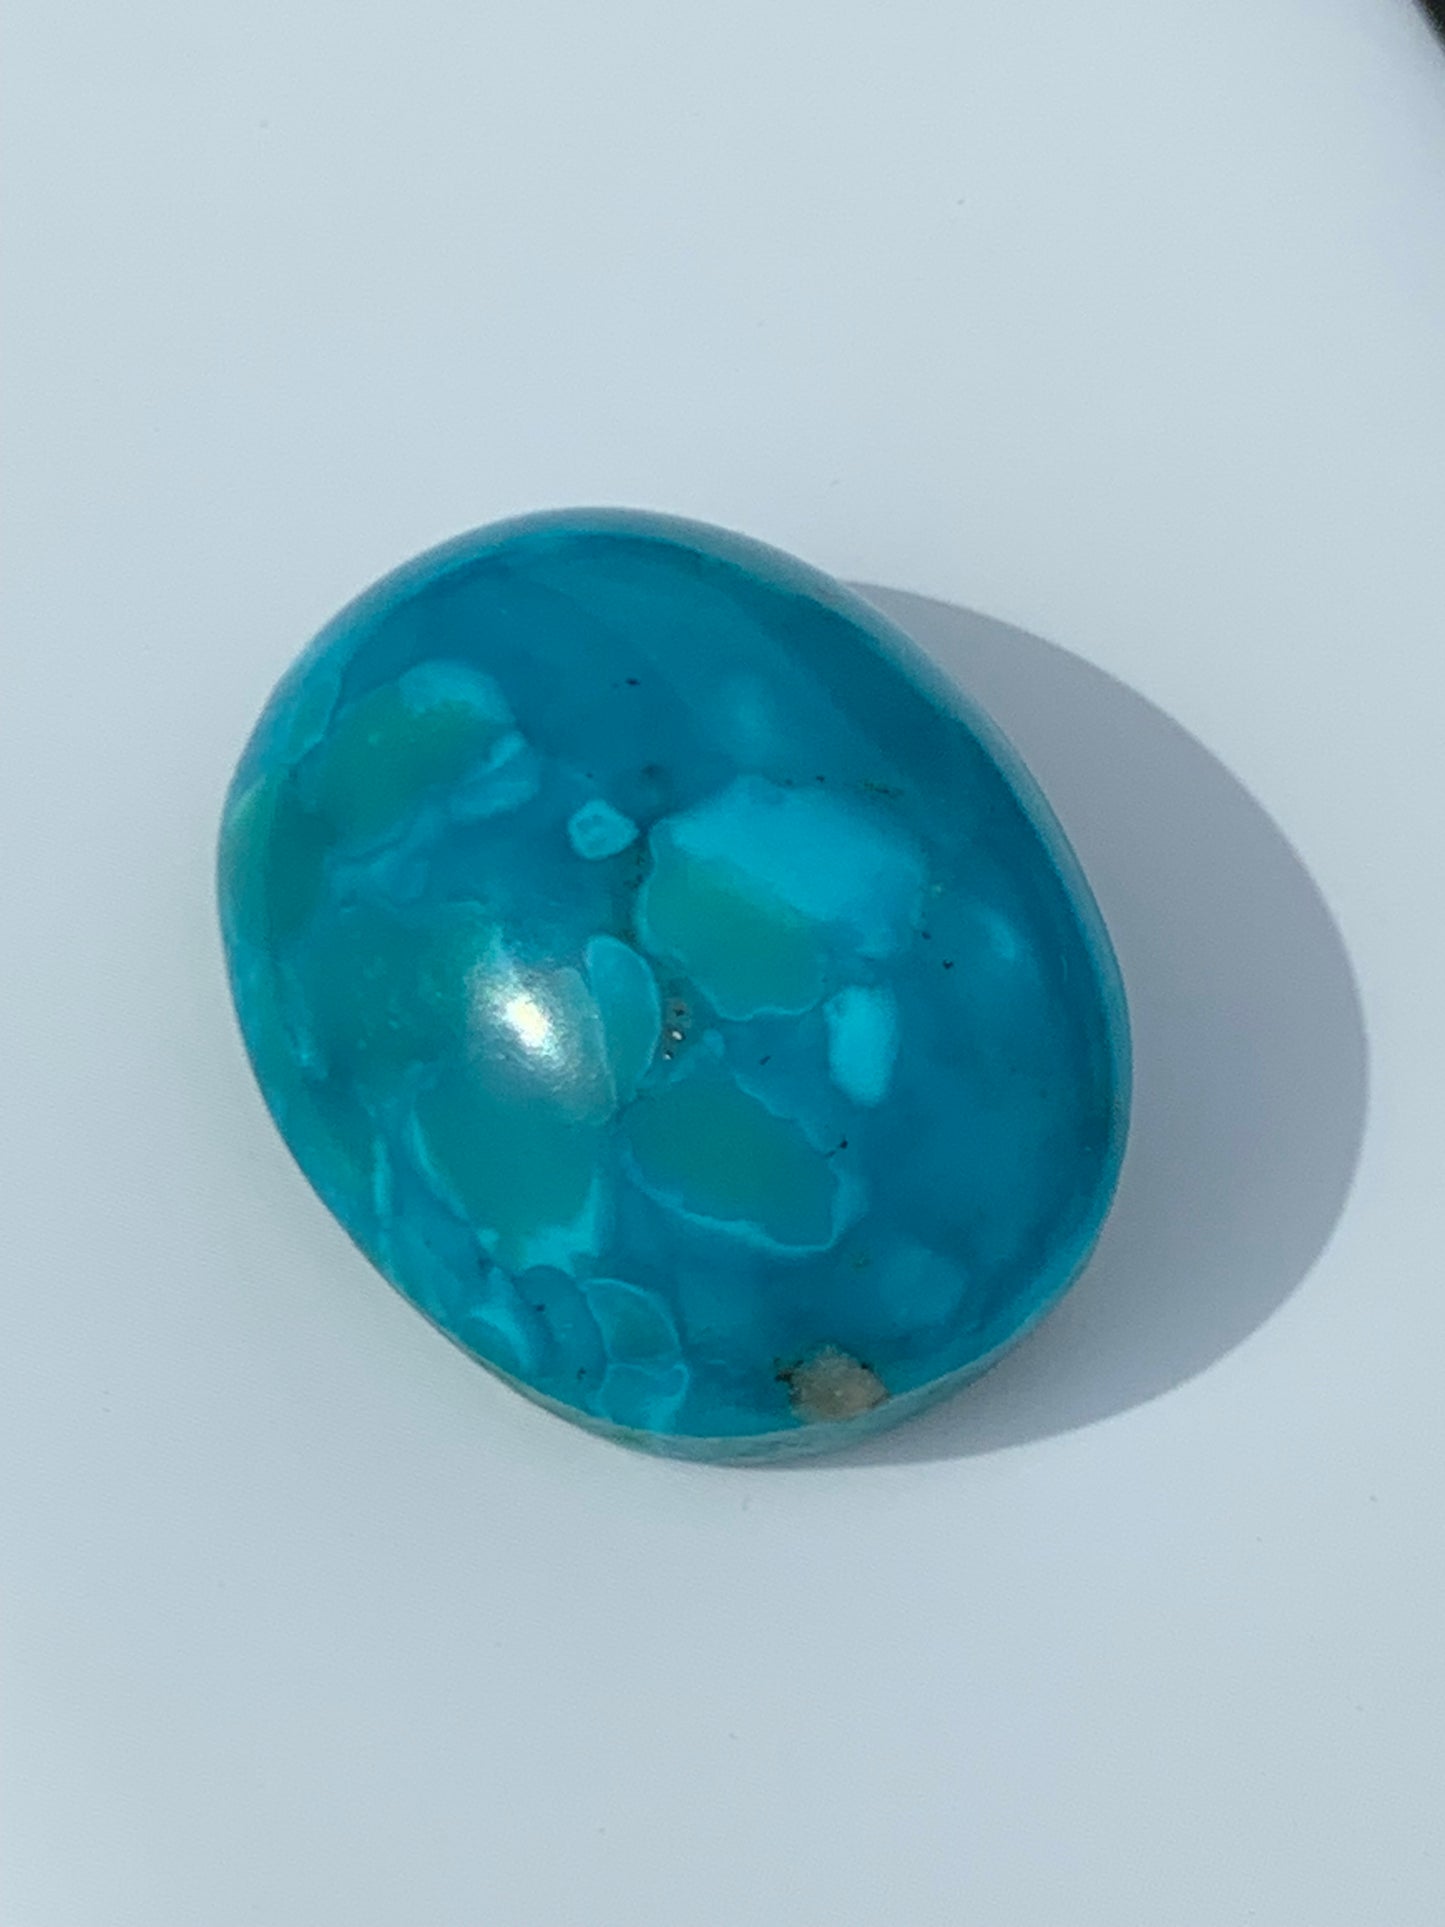 Rare Natural Persian Turquoise Gemstone from Afghanistan- 47.41 Carat Oval Cut  - High quality Oval Cut, Sky Blue Clean Gemstone